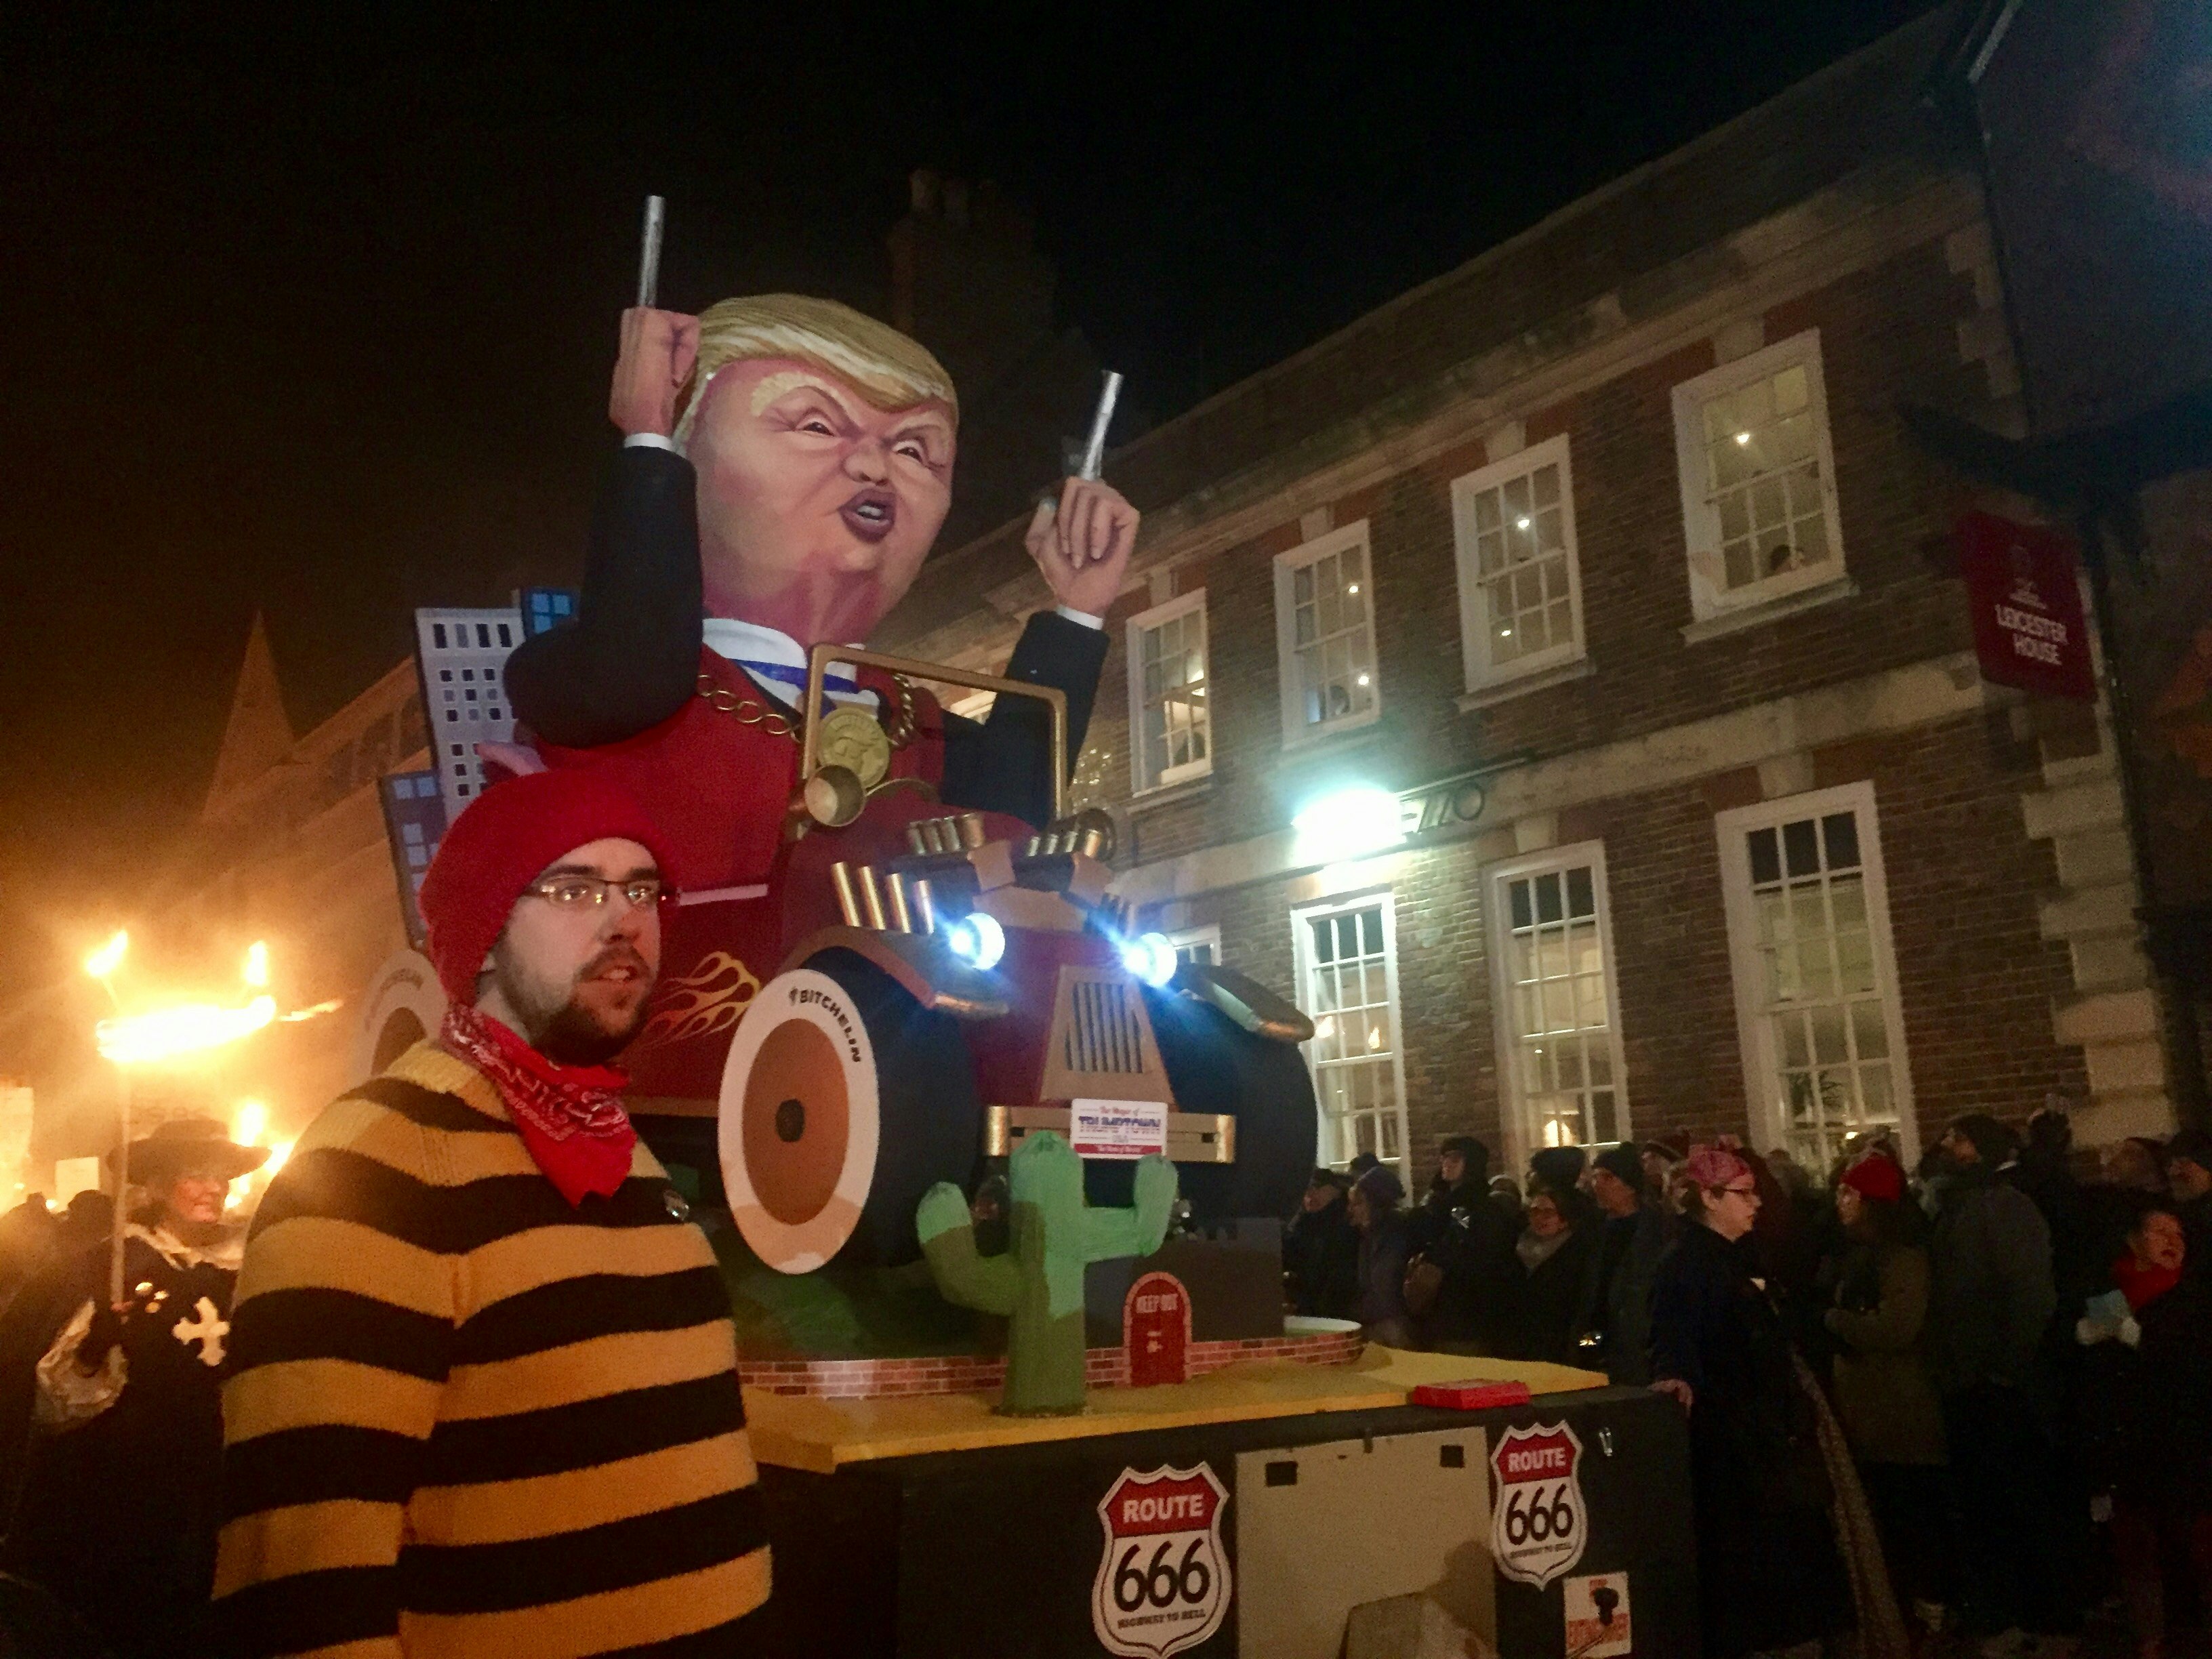 A young man wearing a yellow and black striped t-shirt leads a float with a giant 3D caricature of Donald Trump on it. Trump is depicted toting pistol fingers and is sitting in a car. Crowds are gathered behind. 